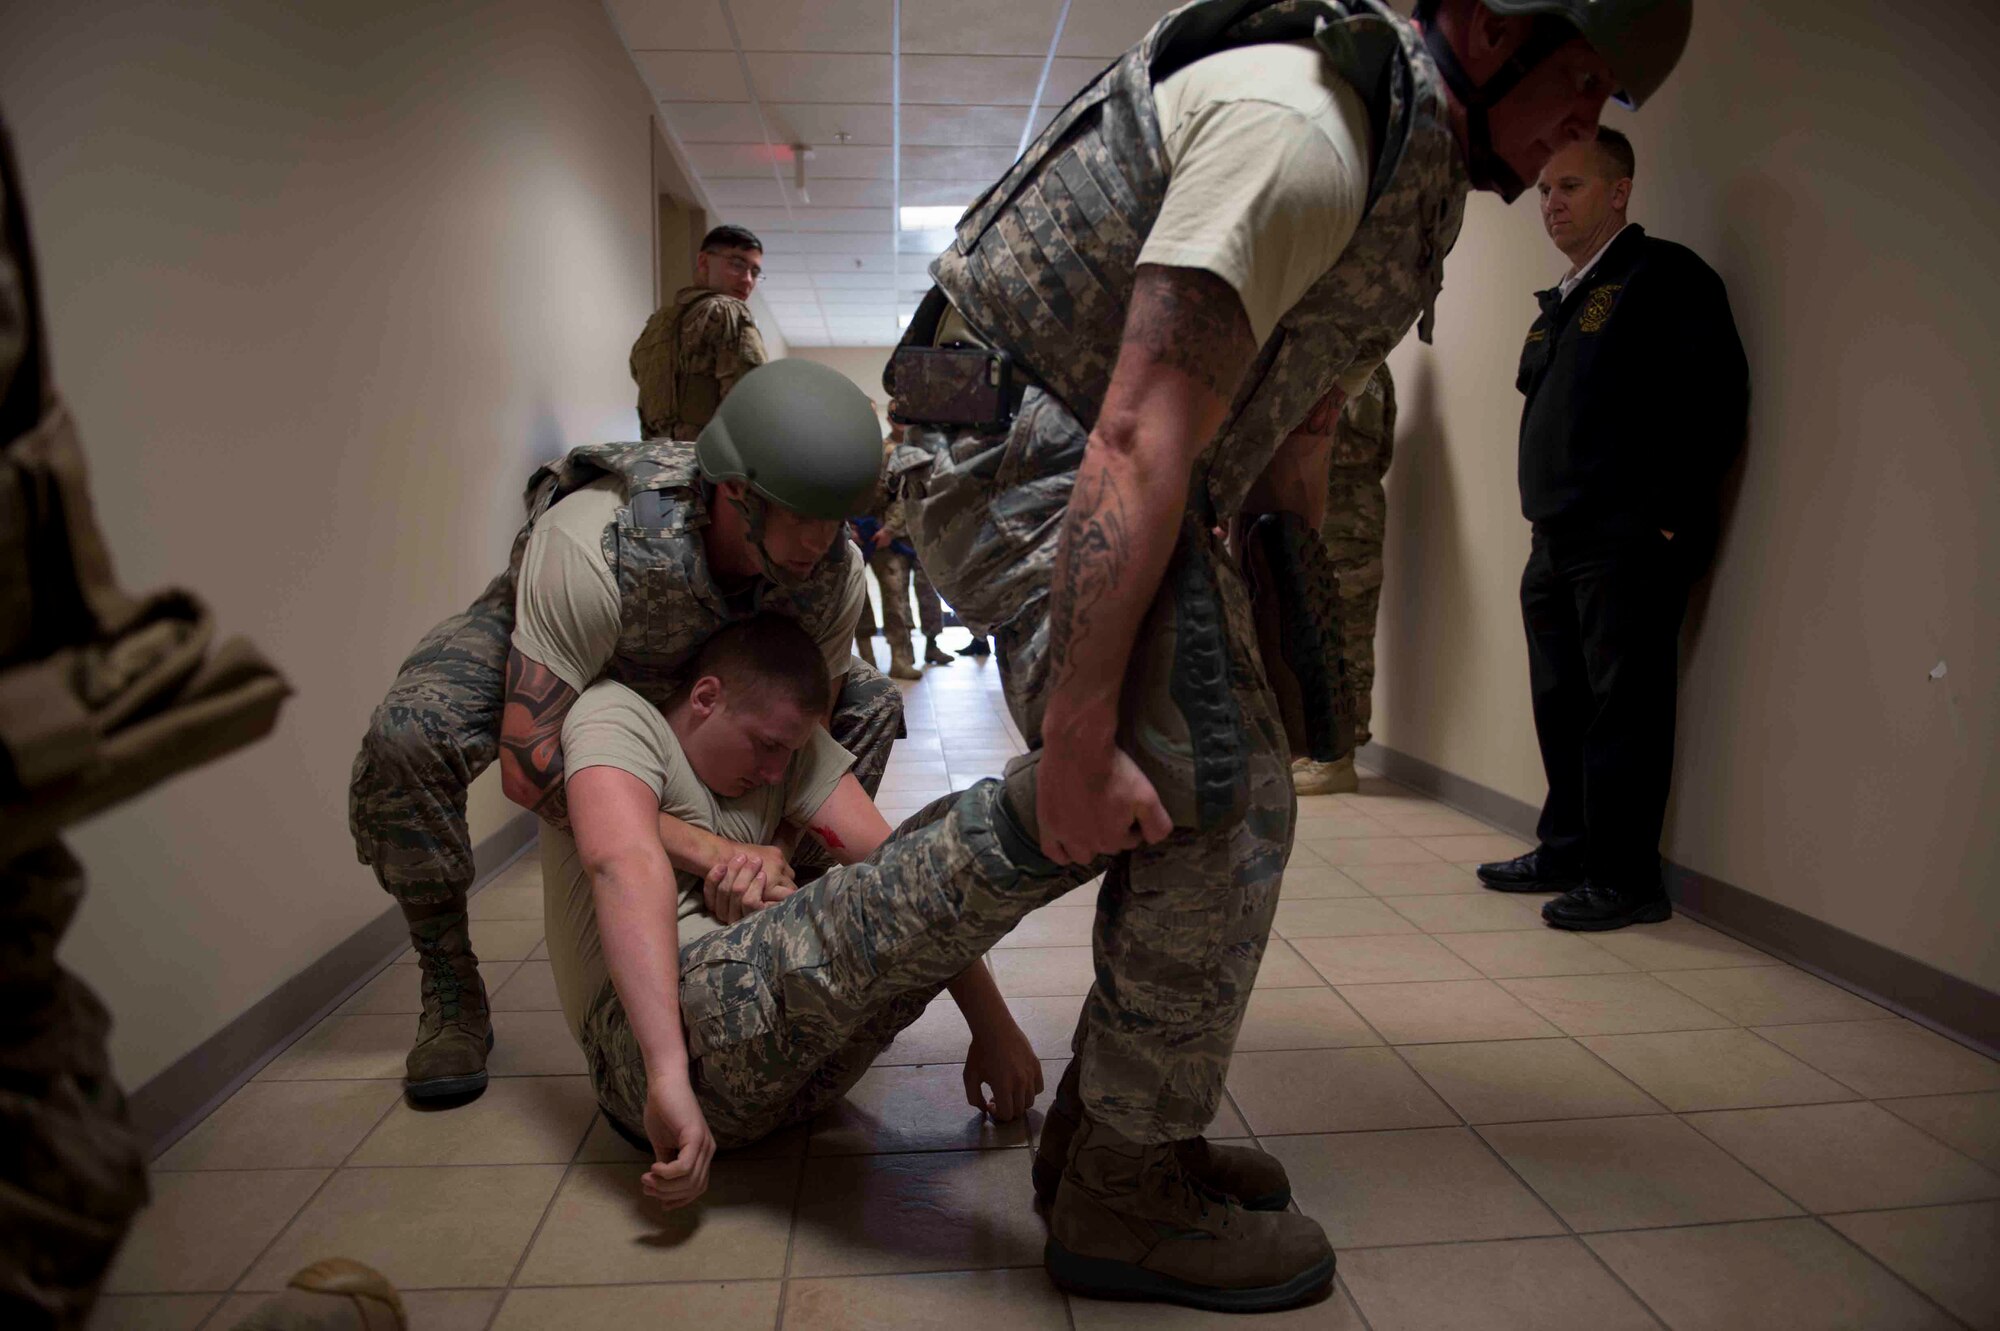 Air Commandos with the 1st Special Operations Civil Engineer Squadron perform first responder duties during an active shooter exercise at Hurlburt Field, Fla., March 10, 2017. Air Commandos with the 1st Special Operations Security Forces Squadron, 1st Special Operations Civil Engineer Squadron and the 1st Special Operations Medical Group participated in the exercise to practice new procedures for tactical responders. (U.S. Air Force photo by Senior Airman Krystal M. Garrett)